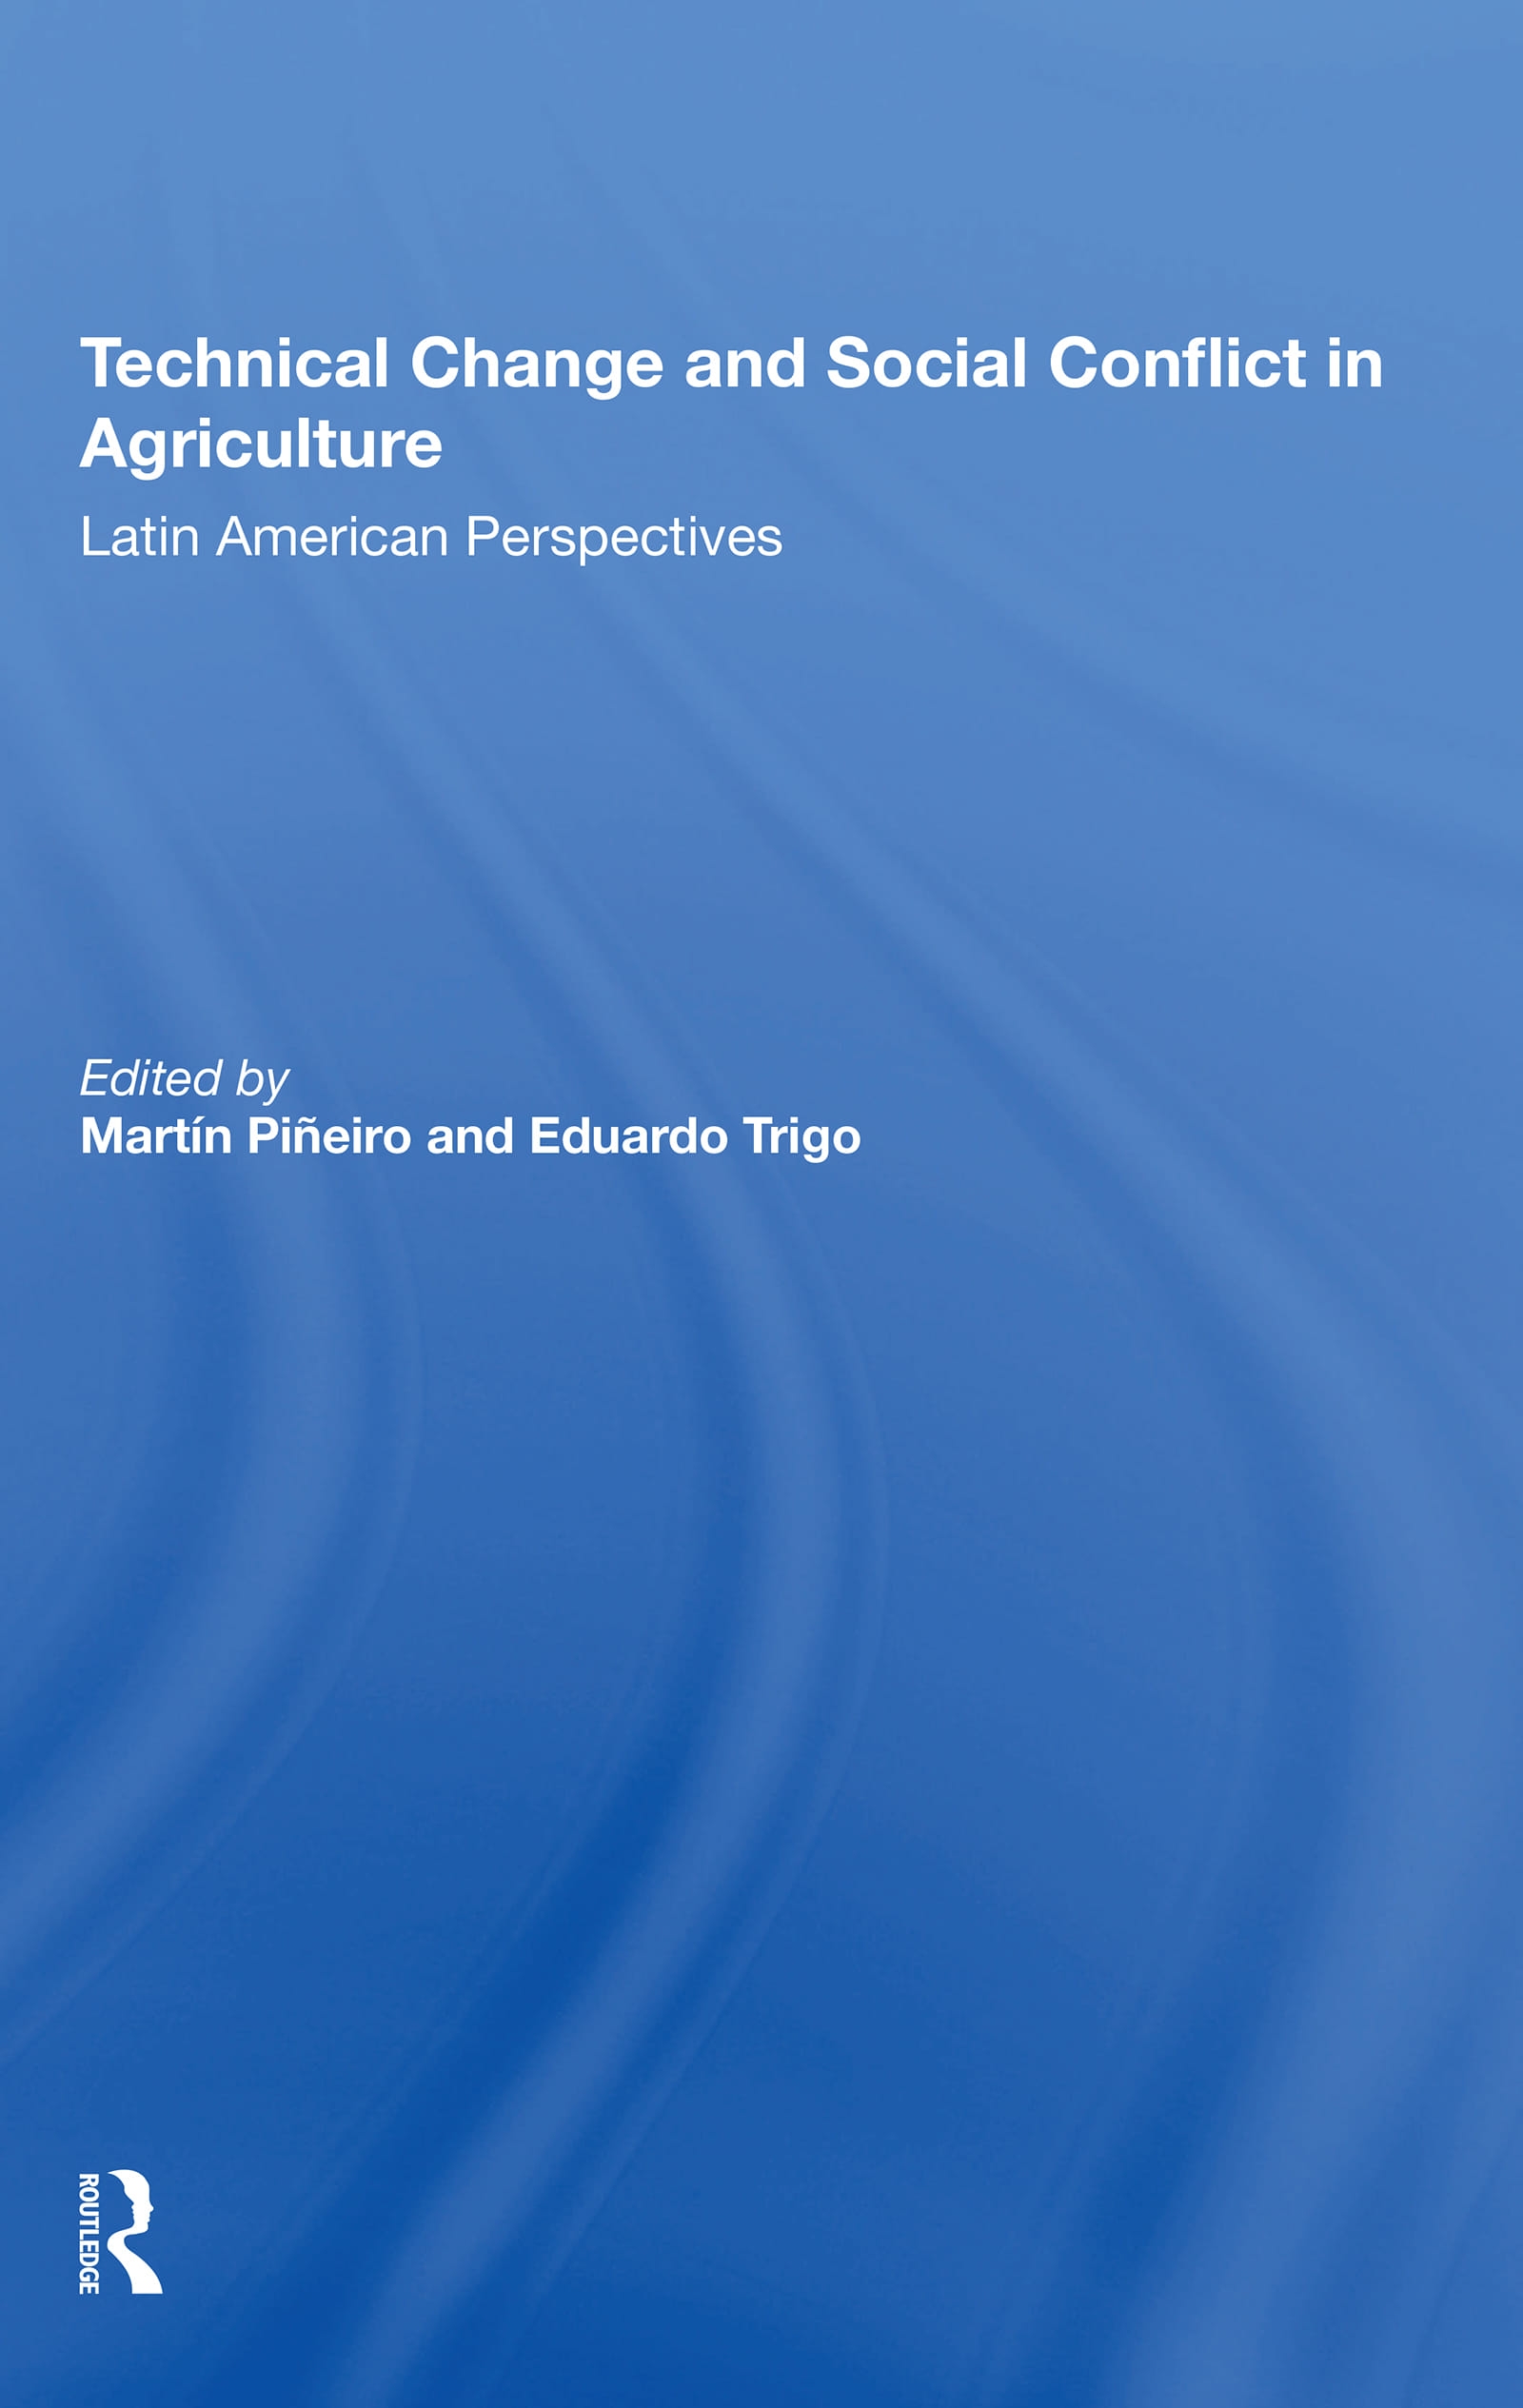 Technical Change and Social Conflict in Agriculture: Latin American Perspectives